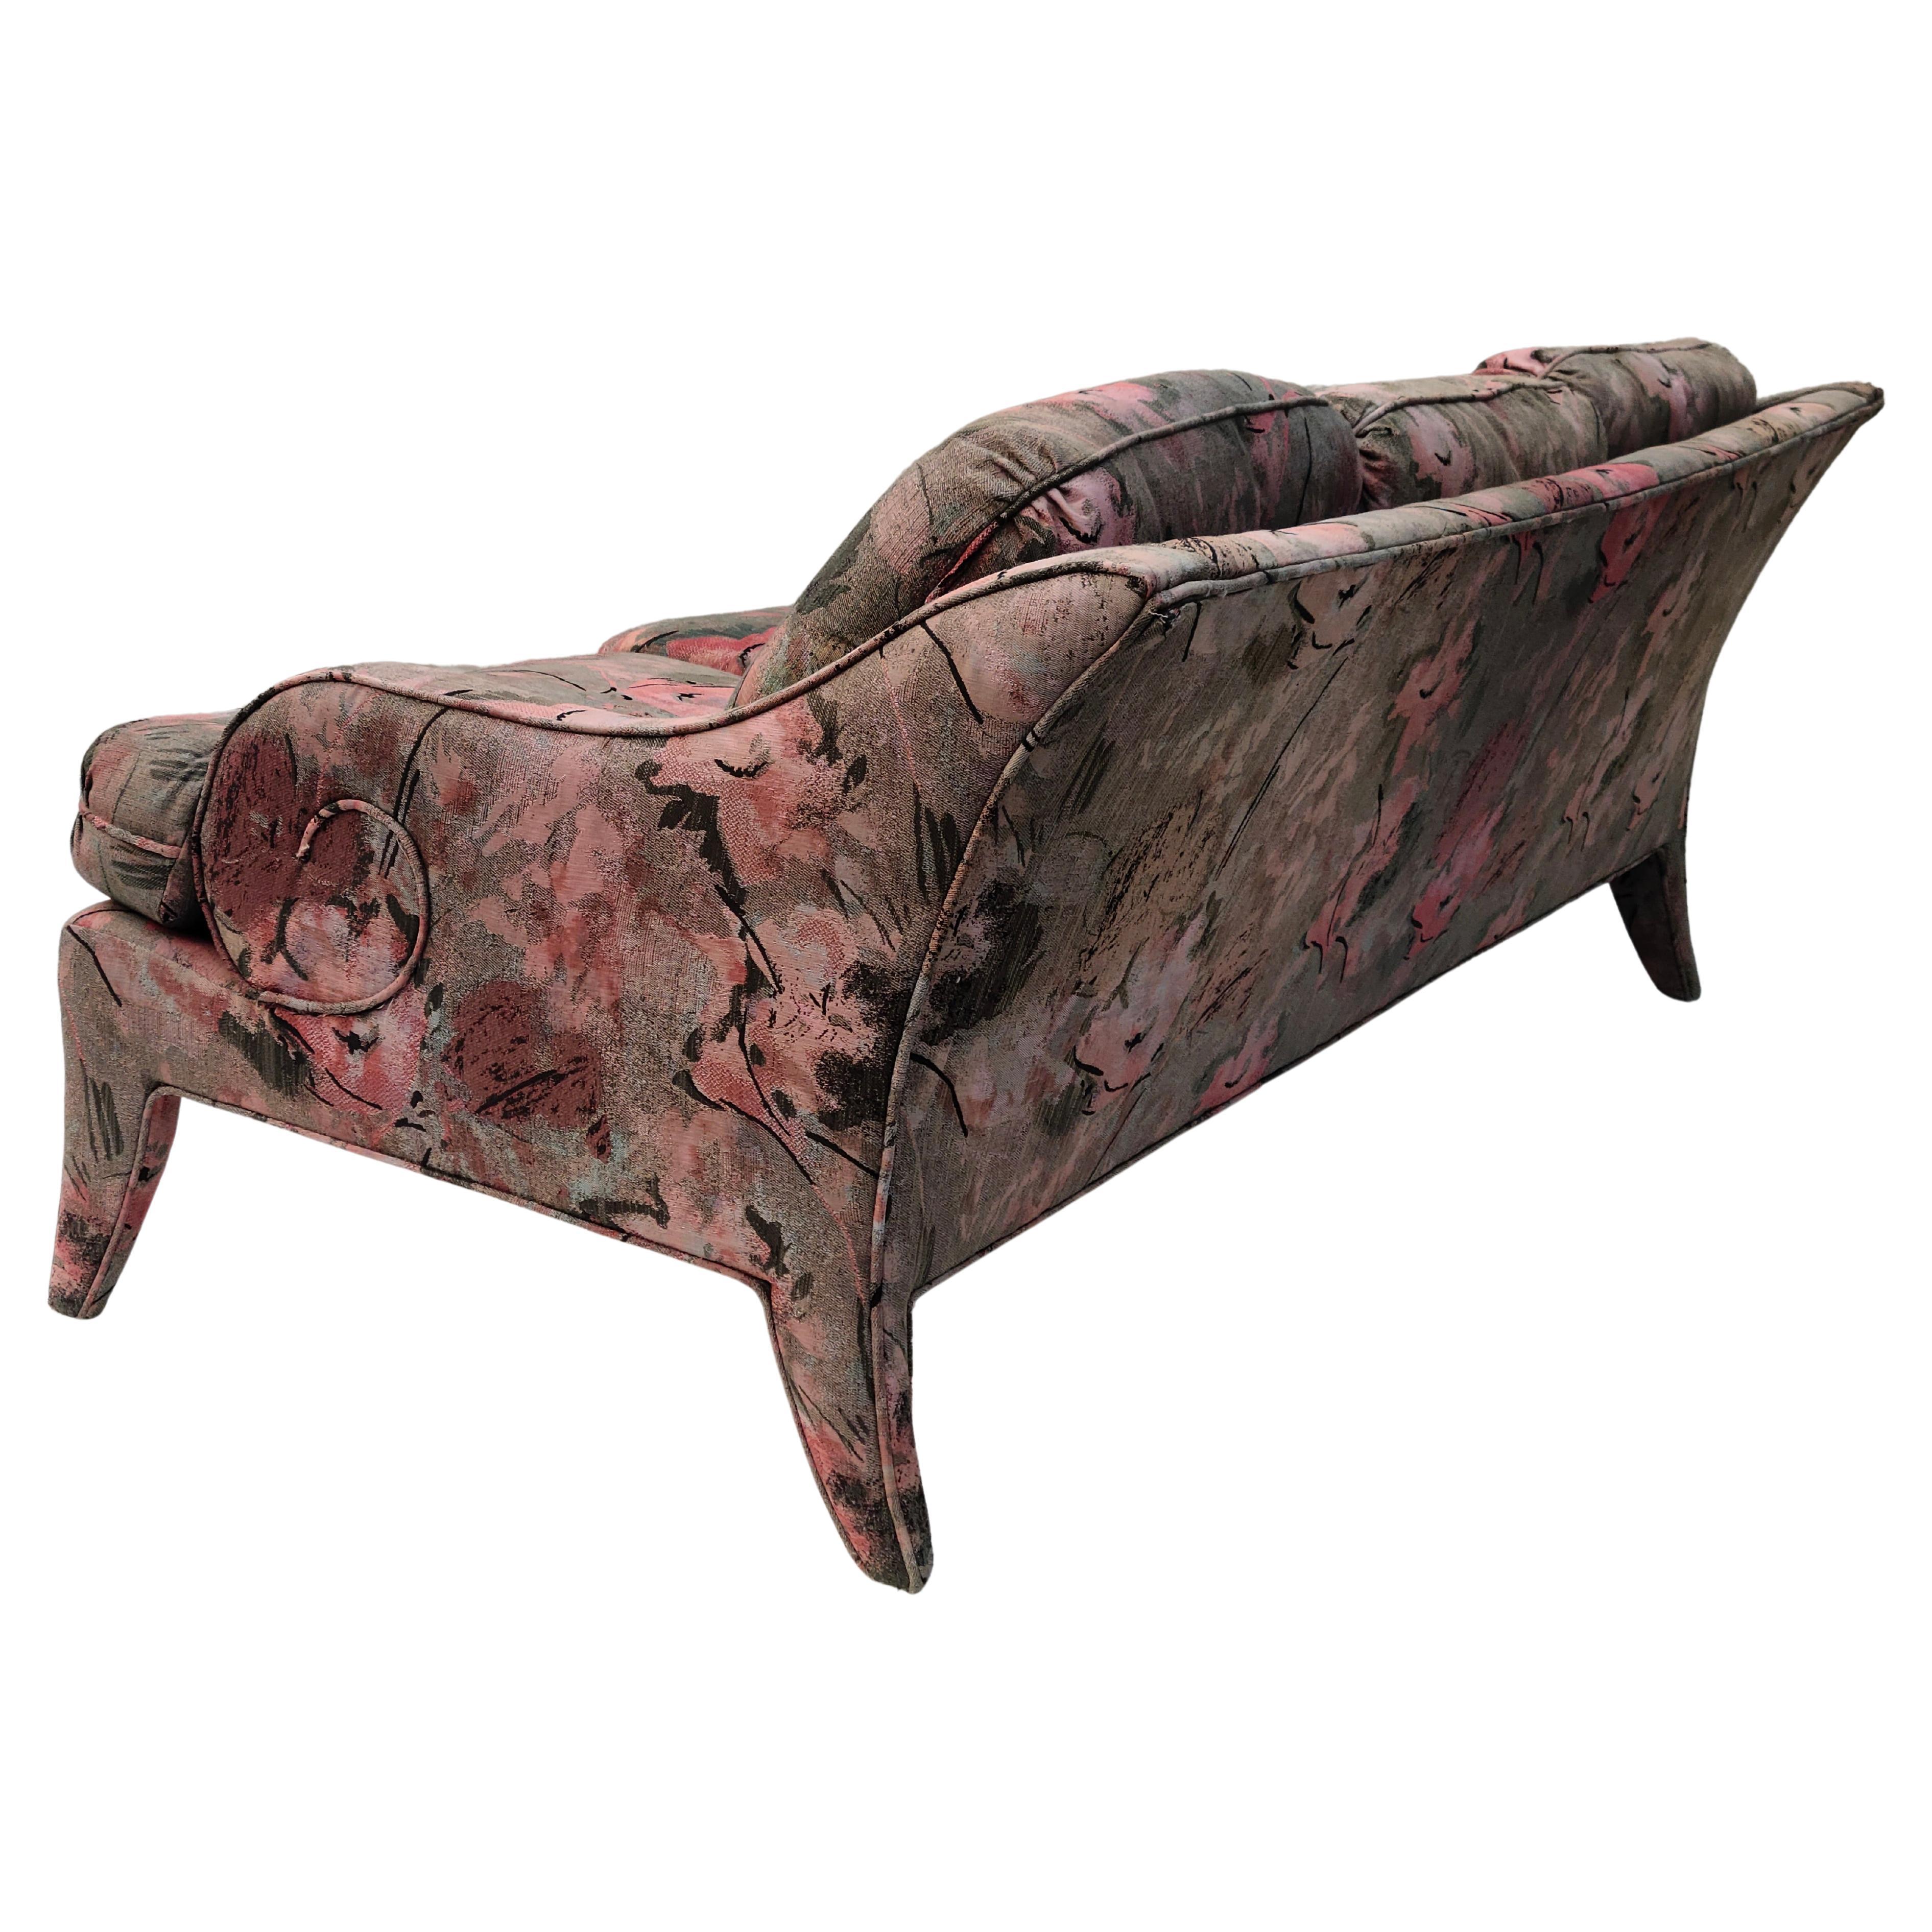 Please feel free to reach out for accurate shipping to your location.

Modern Sculptural Sofa by Thayer Coggin. Large Floral Print.